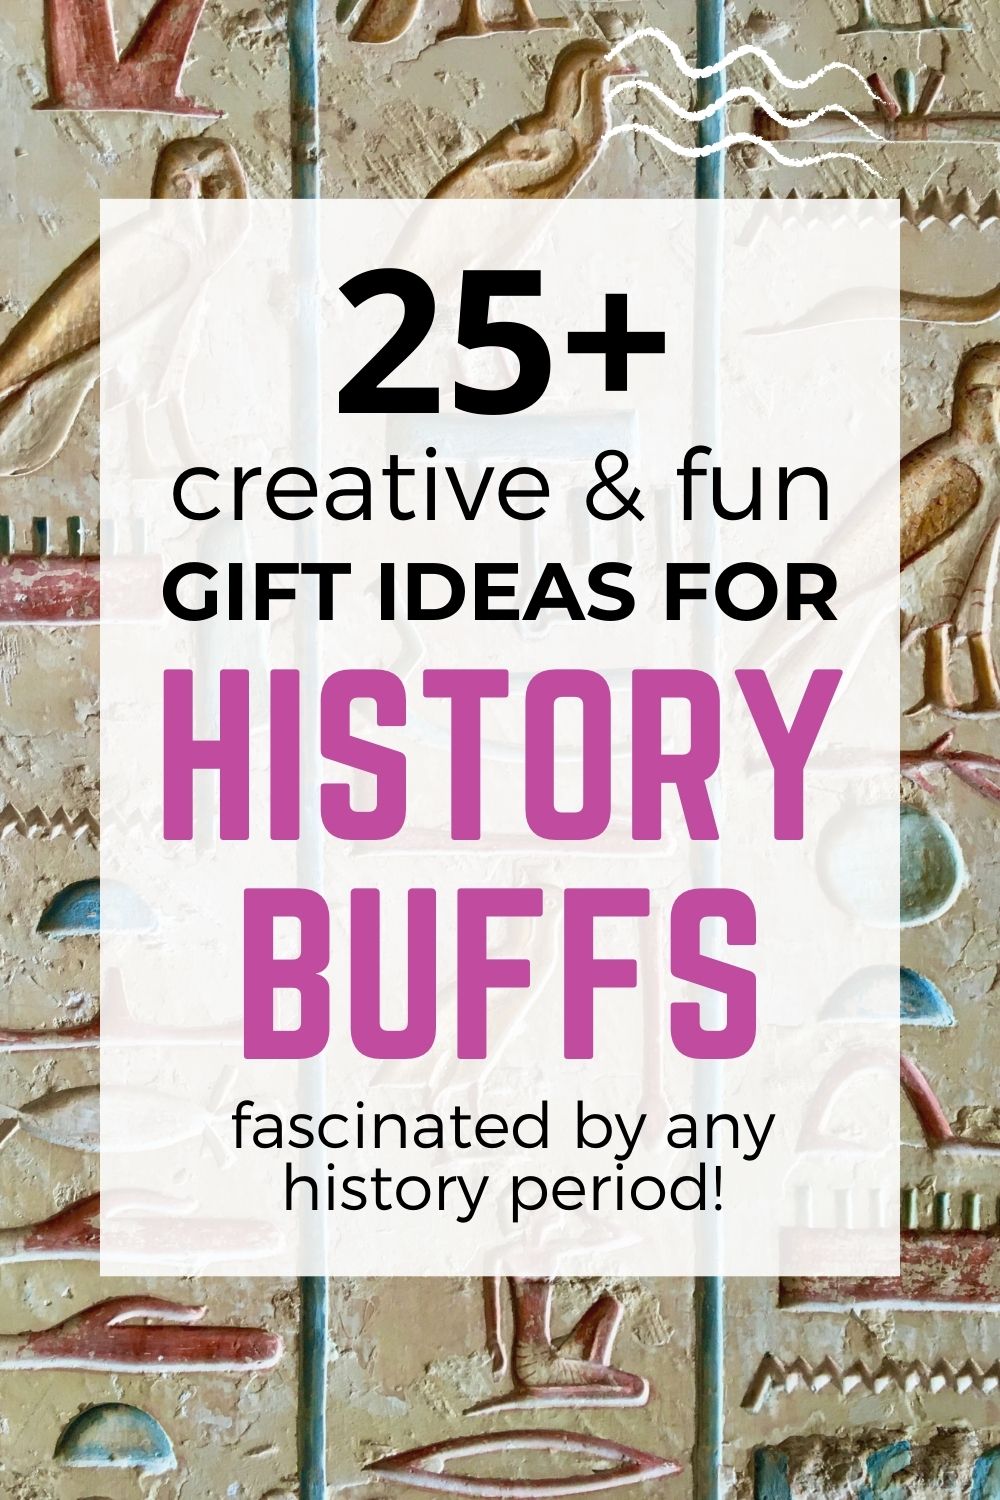 Creative and fun gift ideas for history buffs - Pinterest image